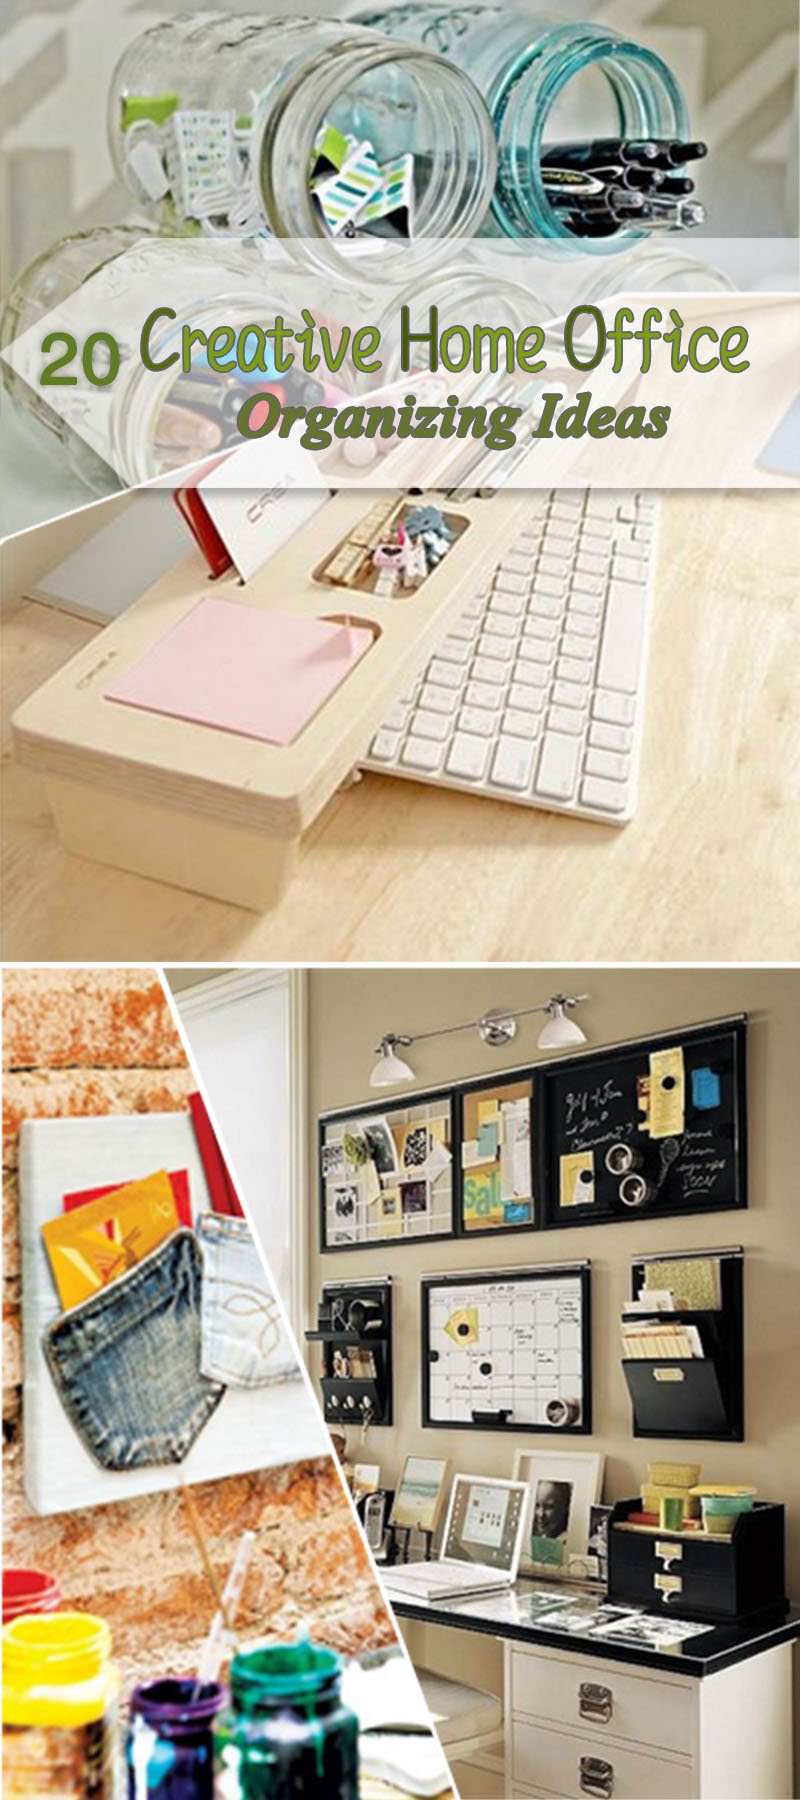 Have a home office? Want to organize it to make it look great? Check out these creative home office organizing ideas and don't forget a clean and organized home office can make you more productive.